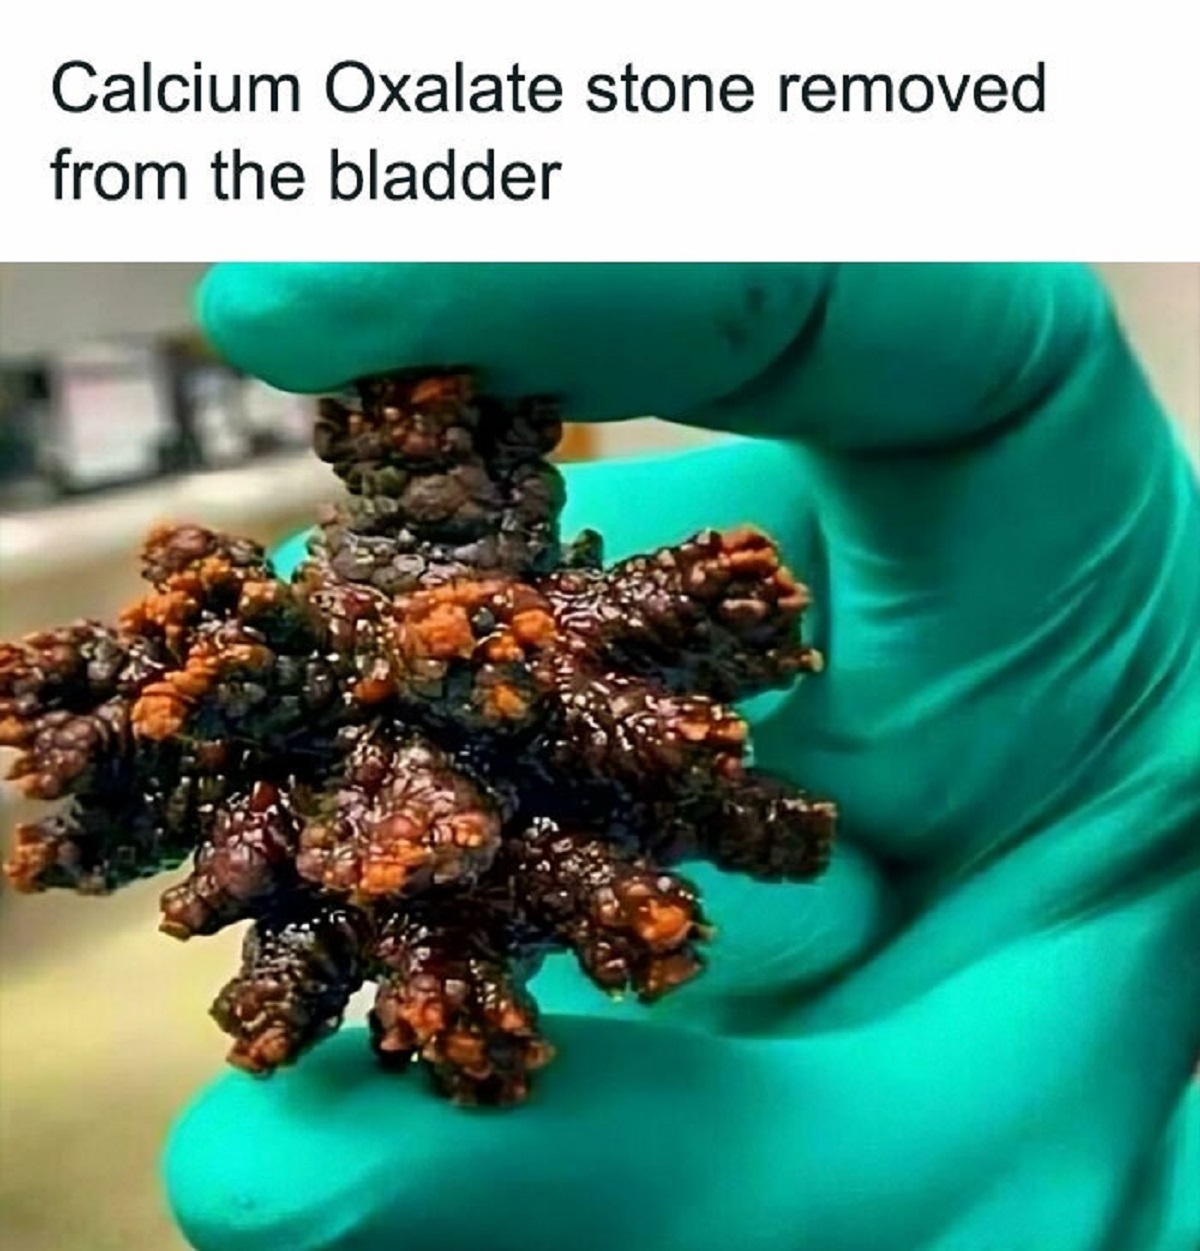 biggest calcium oxalate stone - Calcium Oxalate stone removed from the bladder